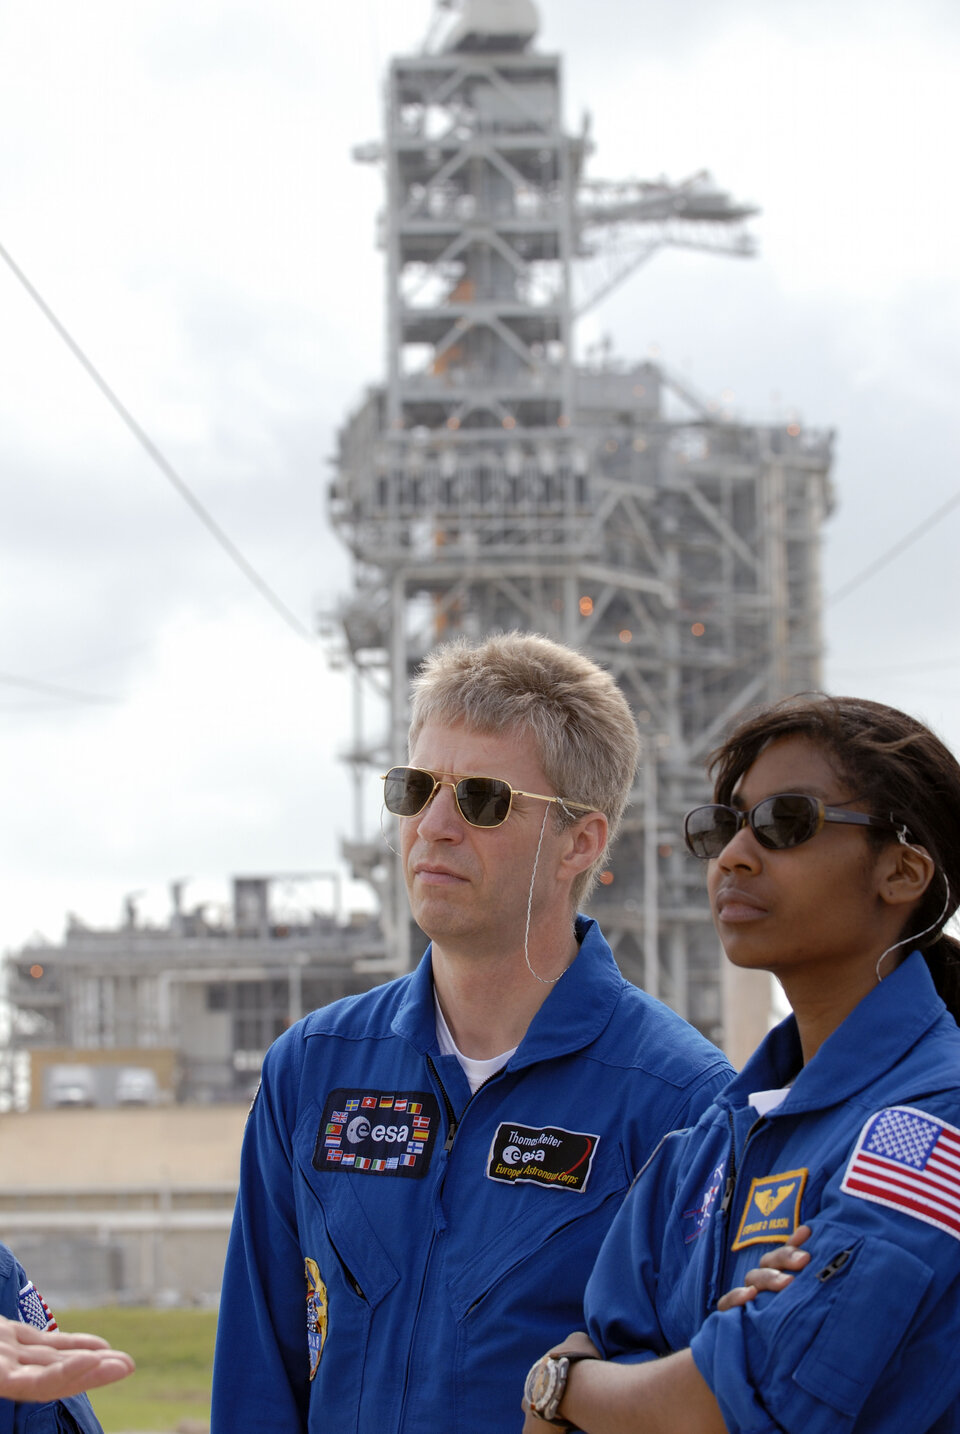 Thomas Reiter and fellow STS-121 crewmember Stephanie Wilson in front of Launch Pad 39B